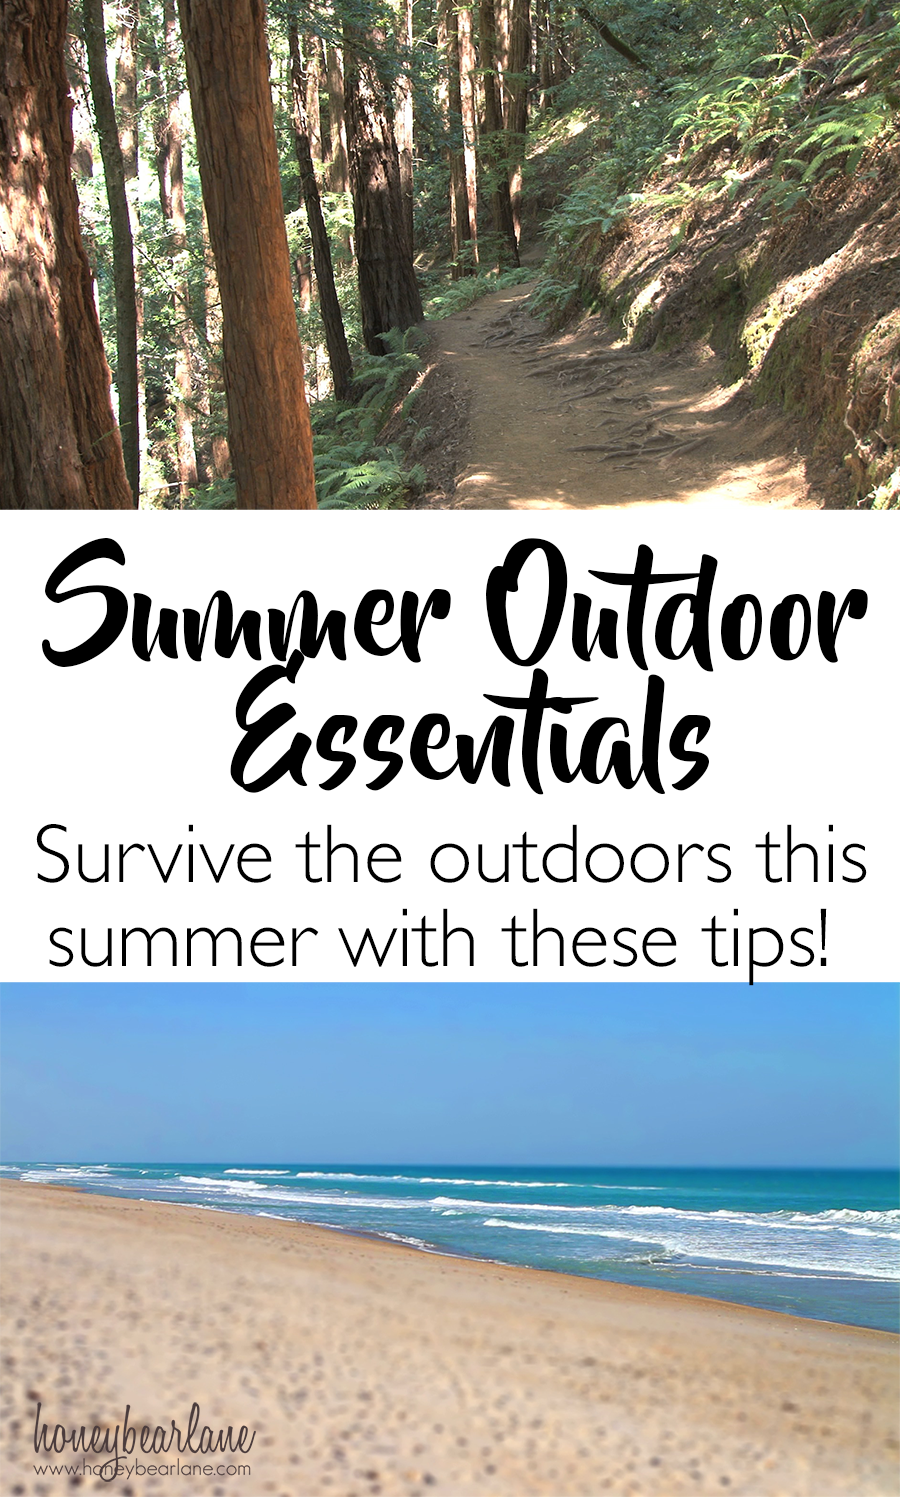 The Outdoor Essentials You Need for Summer